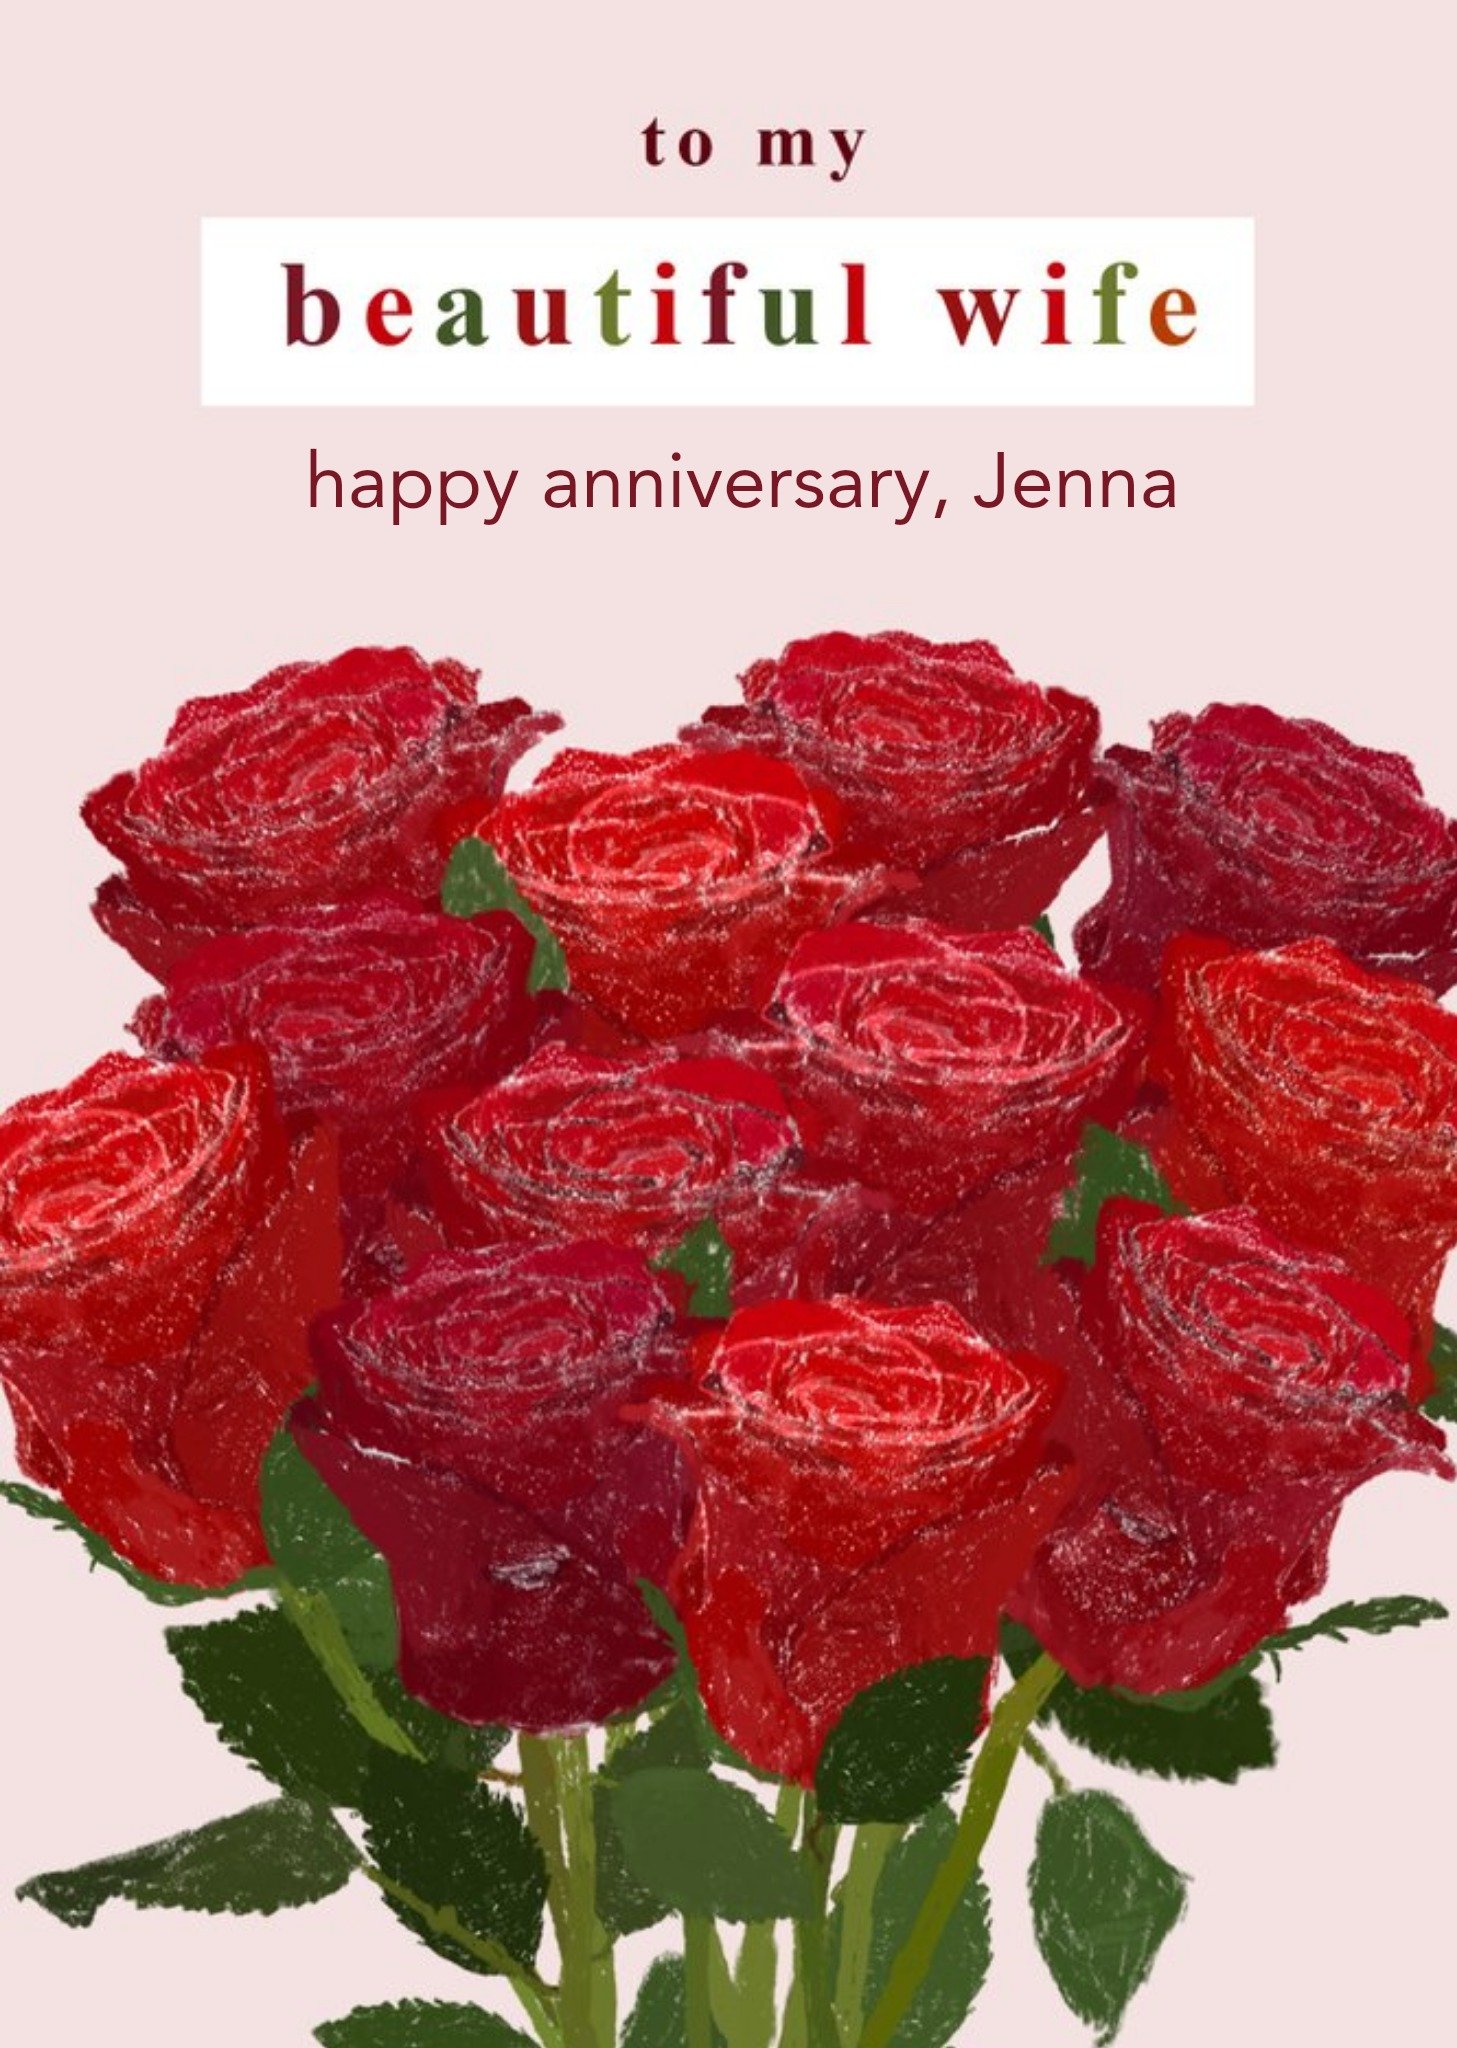 Moonpig Illustration Of A Bunch Of Red Roses Wife's Anniversary Card Ecard